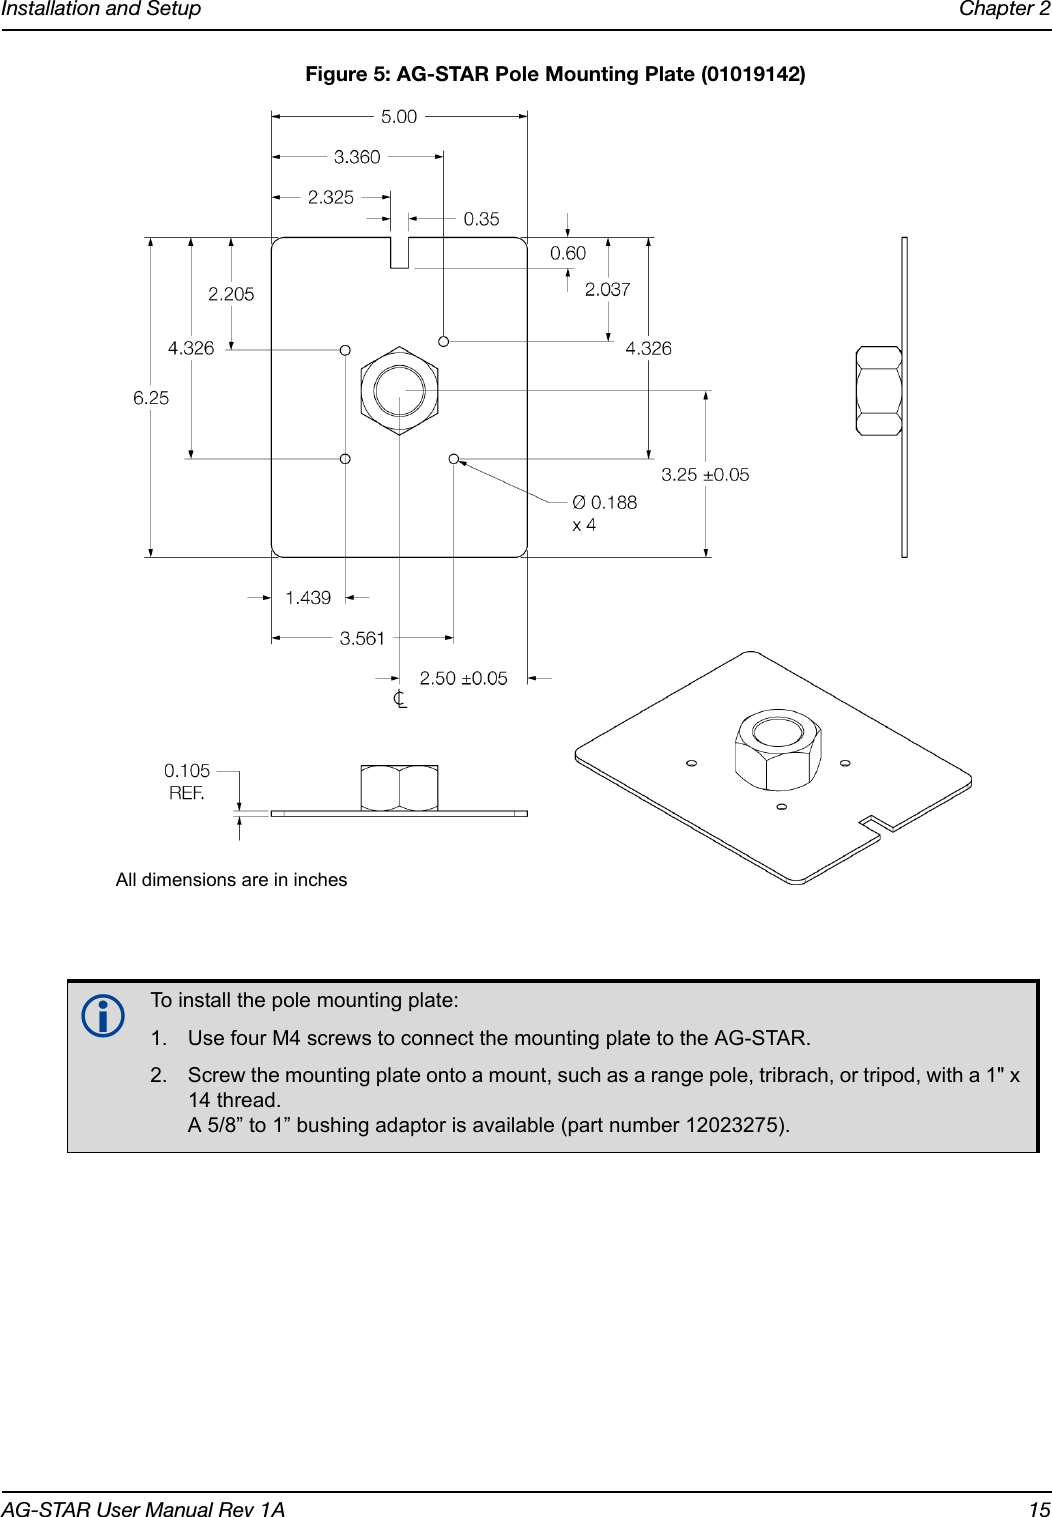 Installation and Setup Chapter 2AG-STAR User Manual Rev 1A 15 Figure 5: AG-STAR Pole Mounting Plate (01019142)To install the pole mounting plate:1. Use four M4 screws to connect the mounting plate to the AG-STAR.2. Screw the mounting plate onto a mount, such as a range pole, tribrach, or tripod, with a 1&quot; x 14 thread. A 5/8” to 1” bushing adaptor is available (part number 12023275).All dimensions are in inches